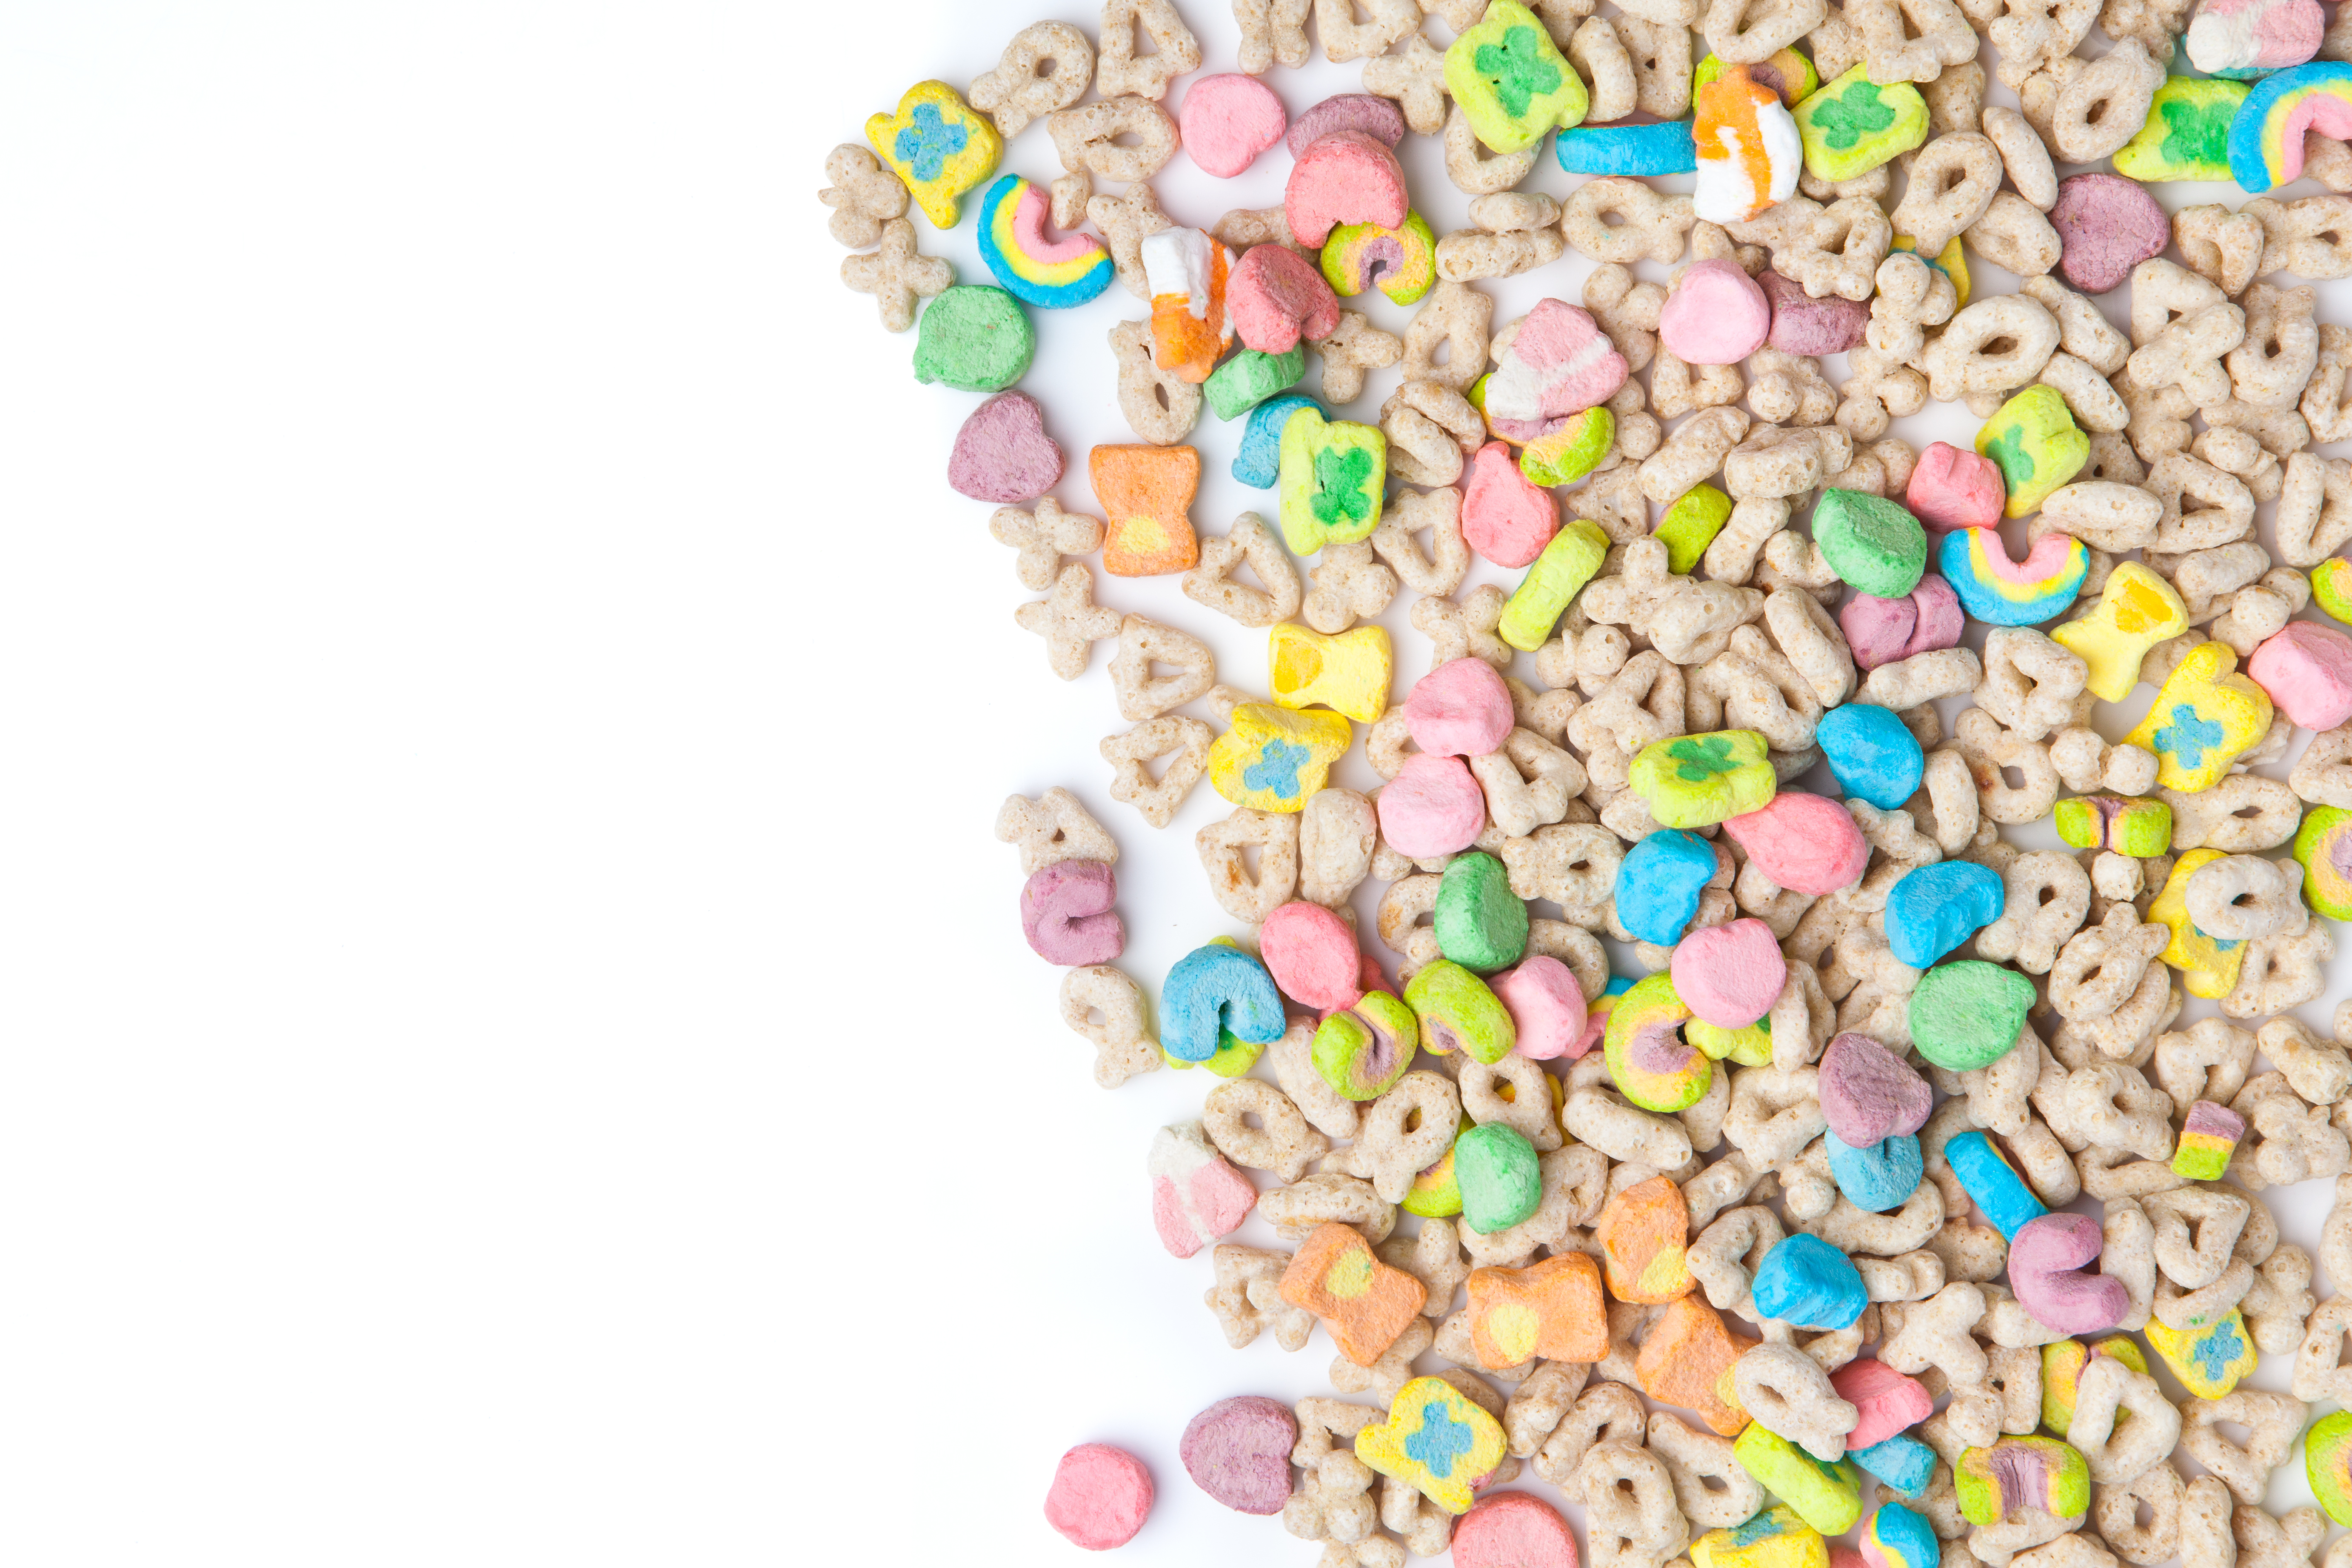 FDA Investigating Lucky Charms, People Think Cereal Made Them Sick